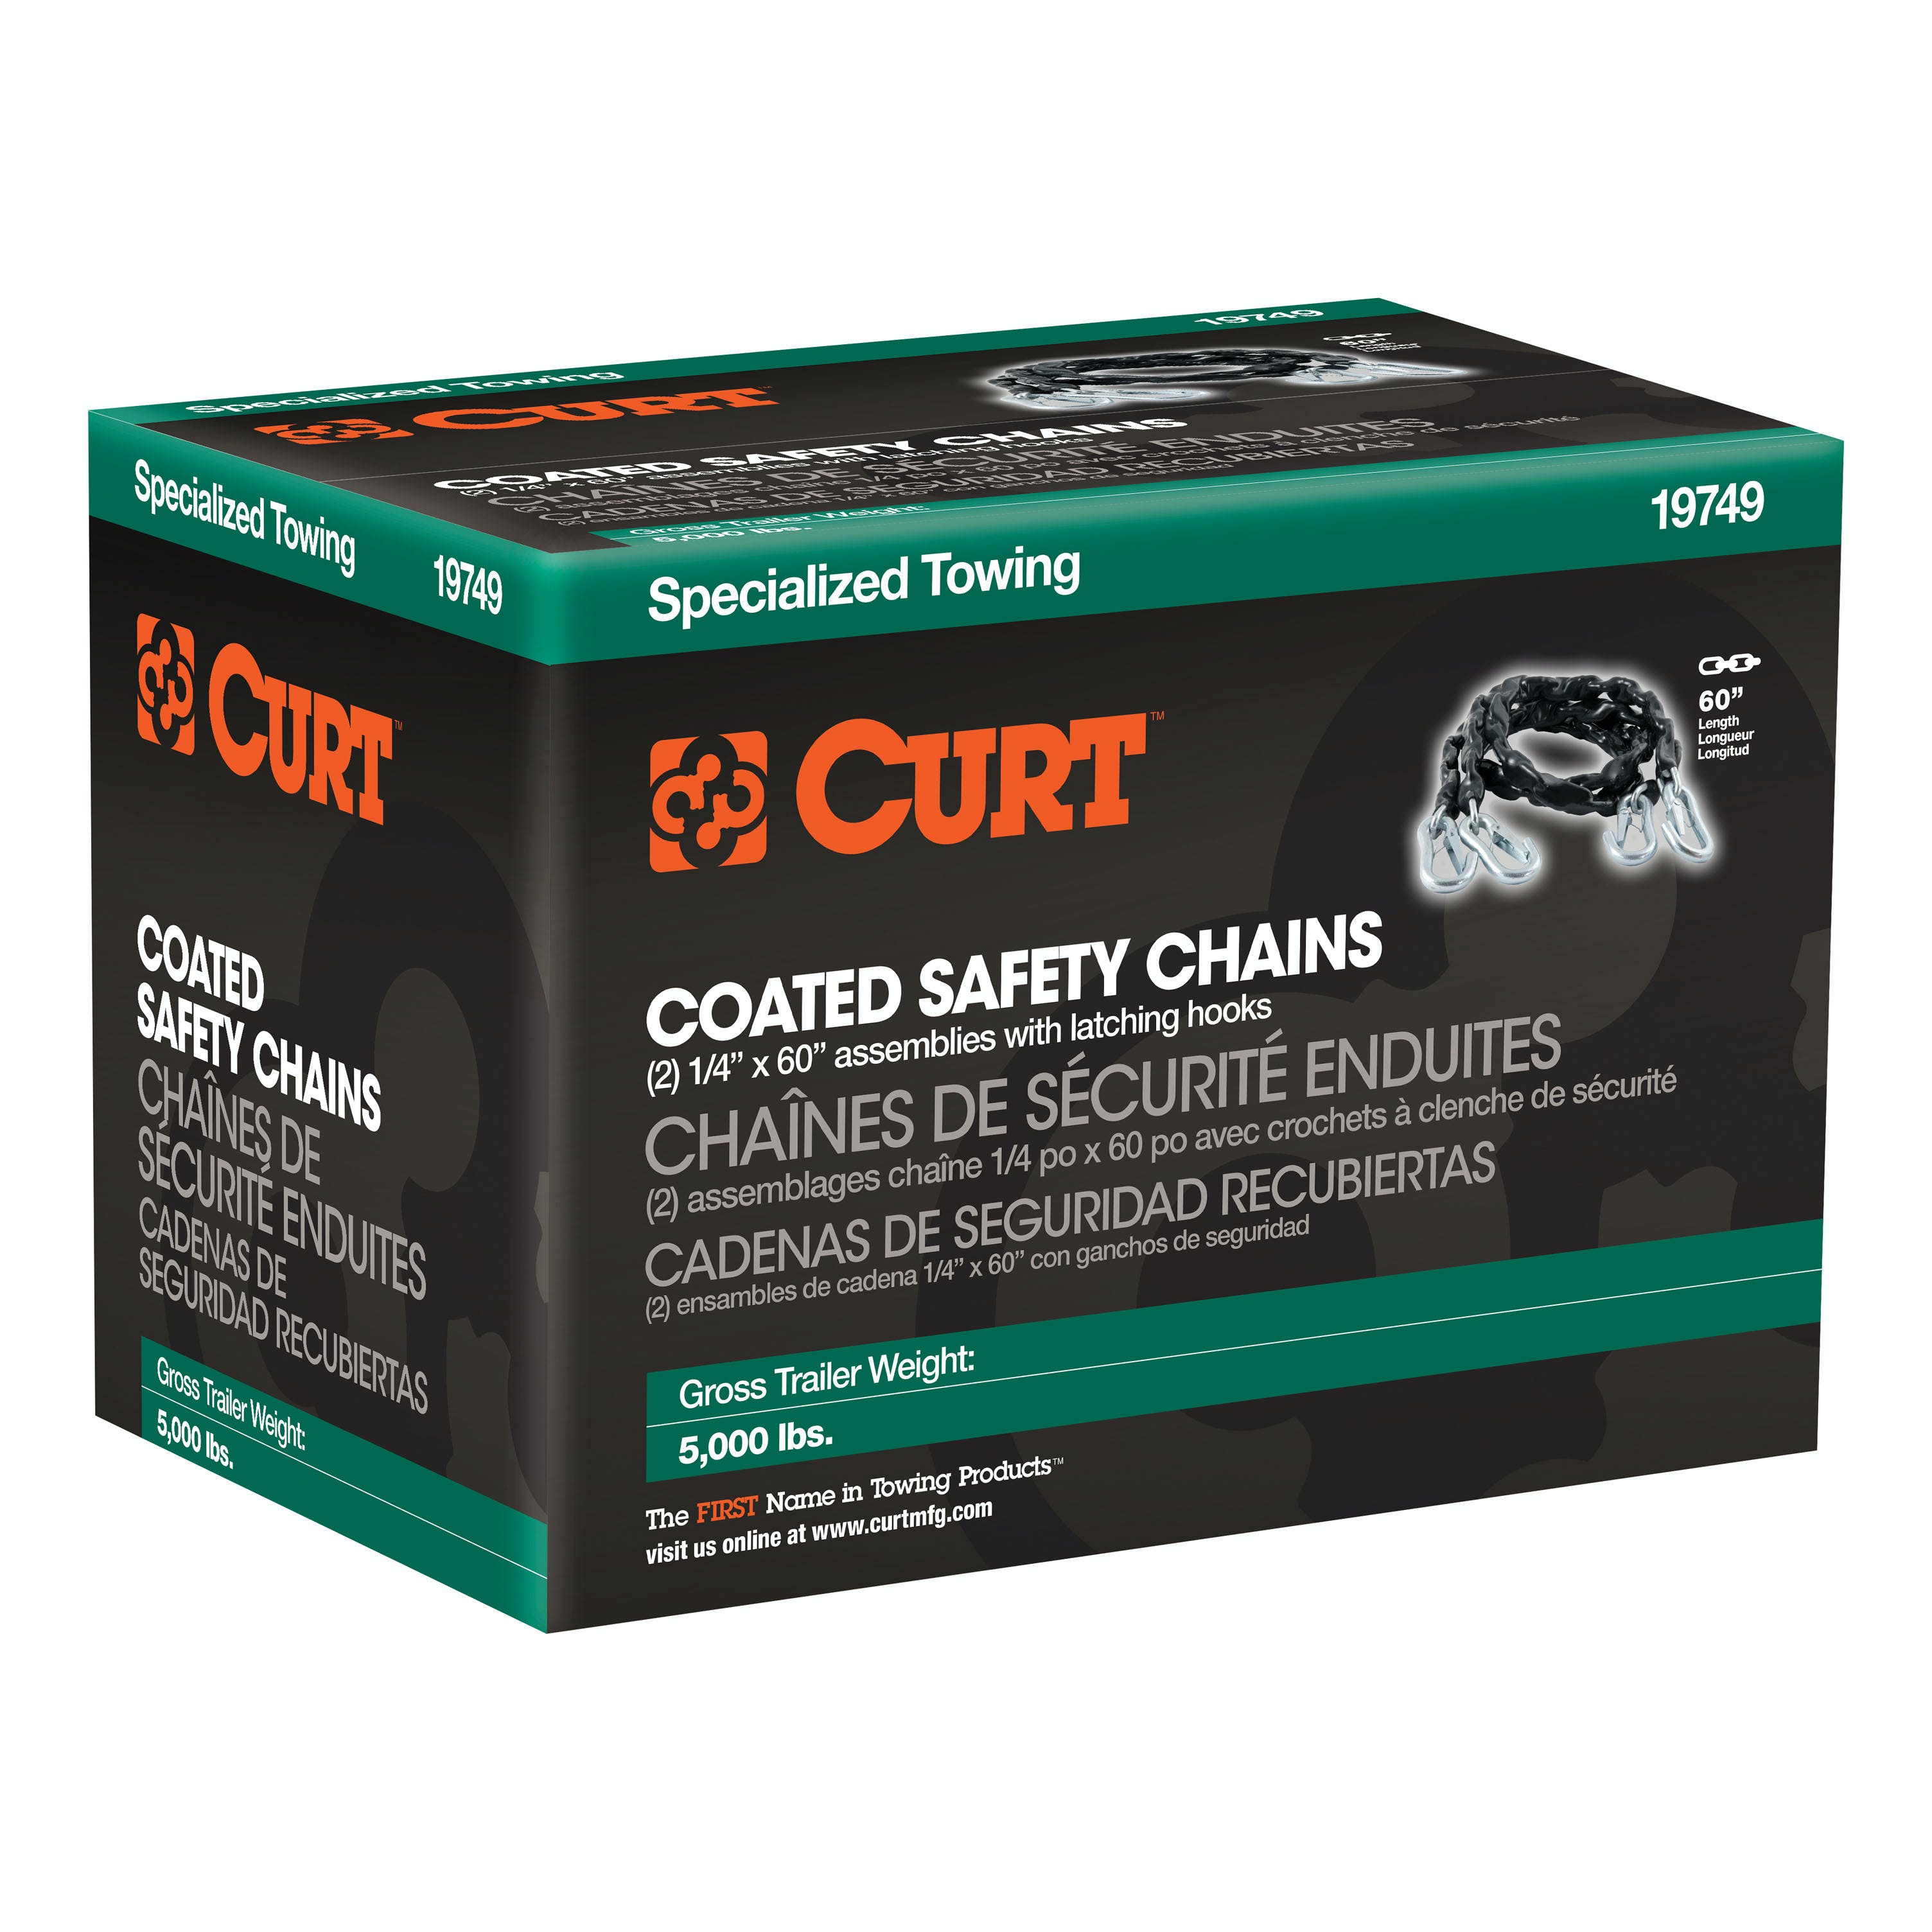 CURT 19749 65 Safety Chains with 2 Snap Hooks Each (5,000 lbs, Vinyl-Coated, 2-Pack)